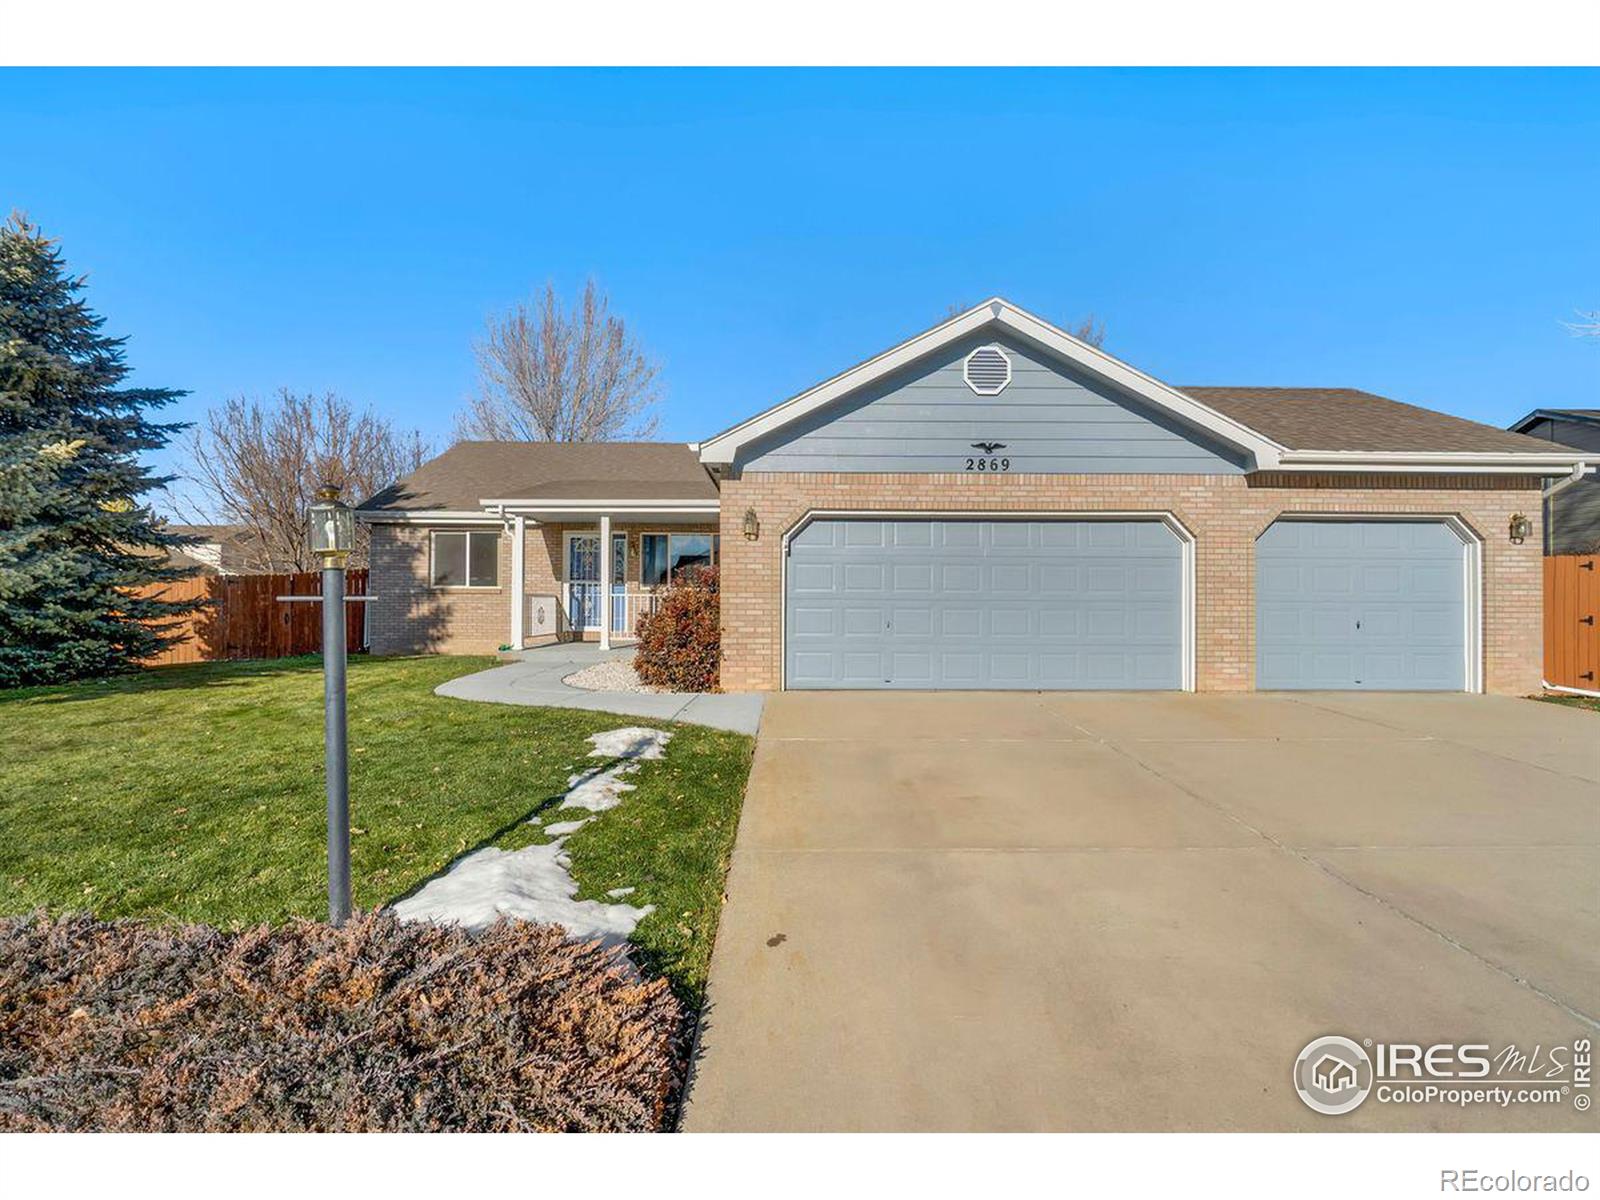 Report Image for 2869  Lotus Place,Loveland, Colorado